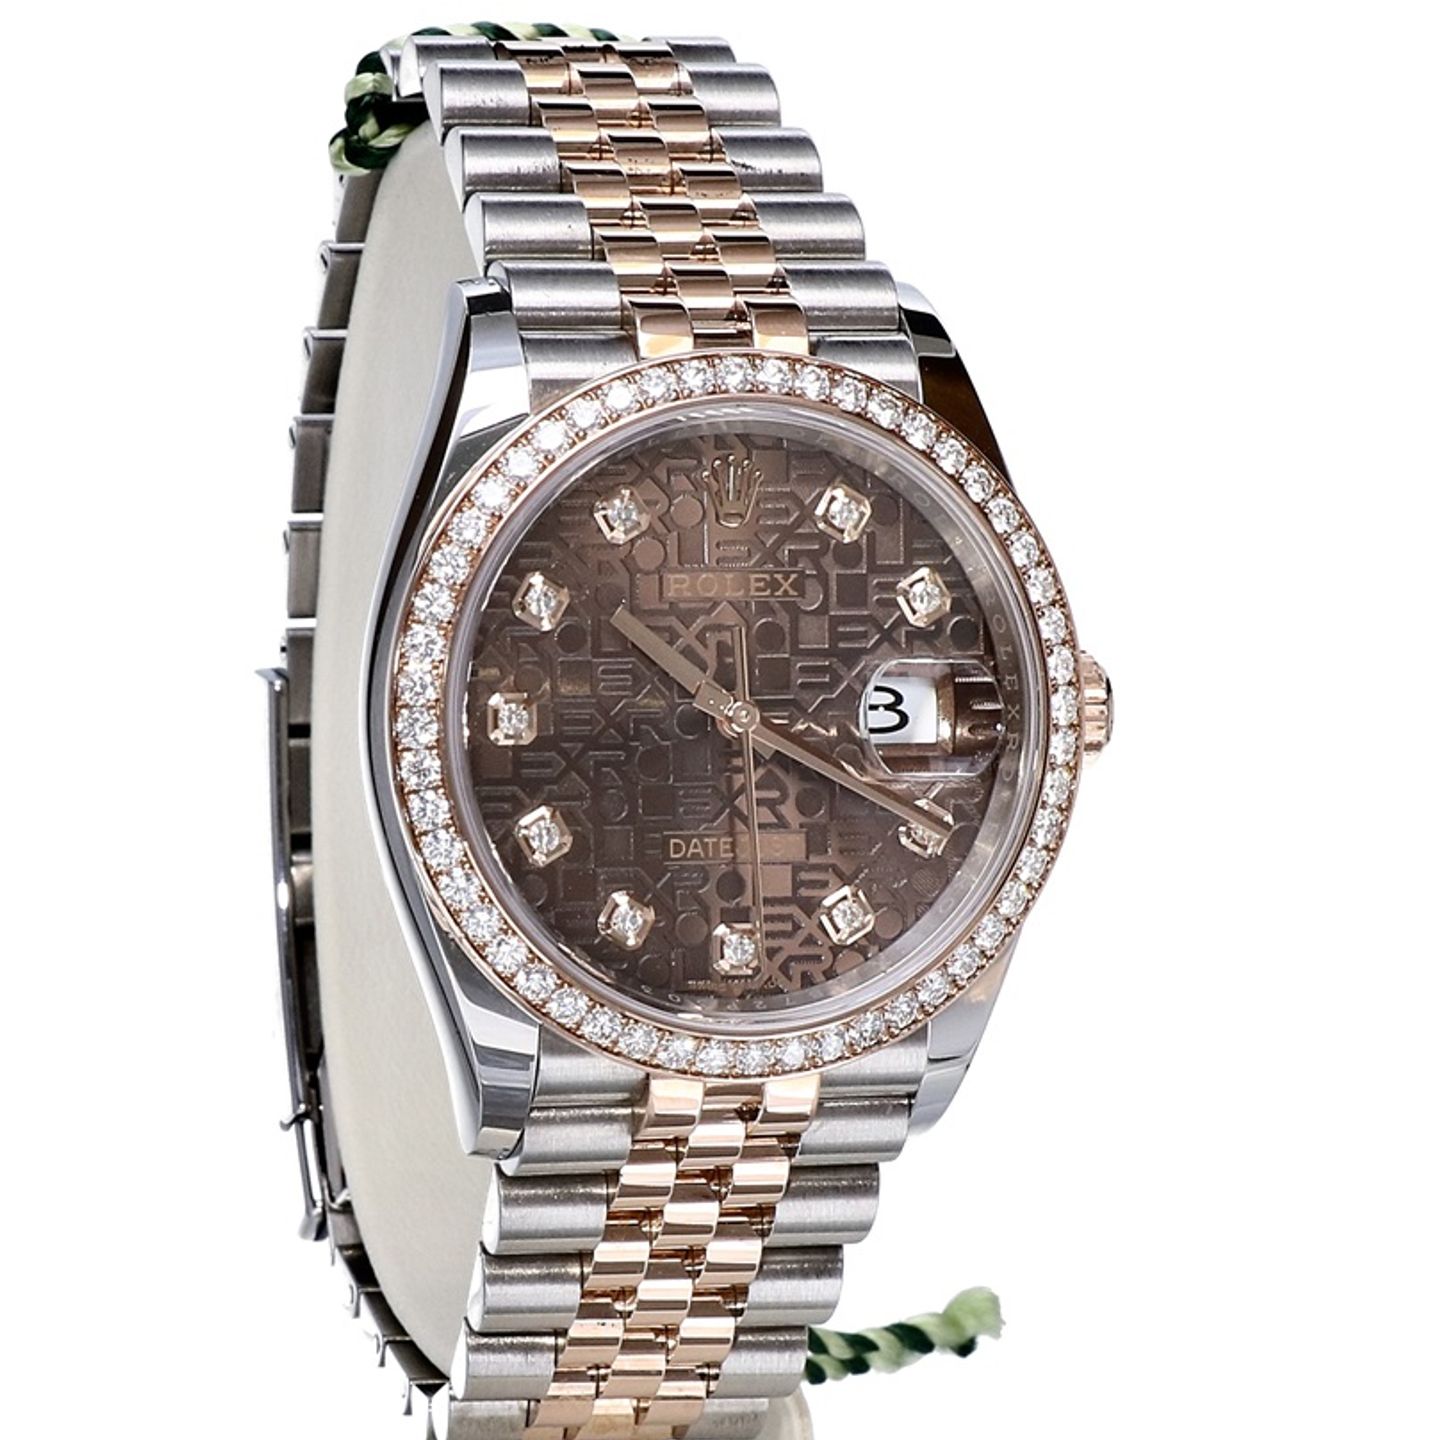 Rolex Datejust 36 126281RBR (2019) - Brown dial 36 mm Steel case (5/8)